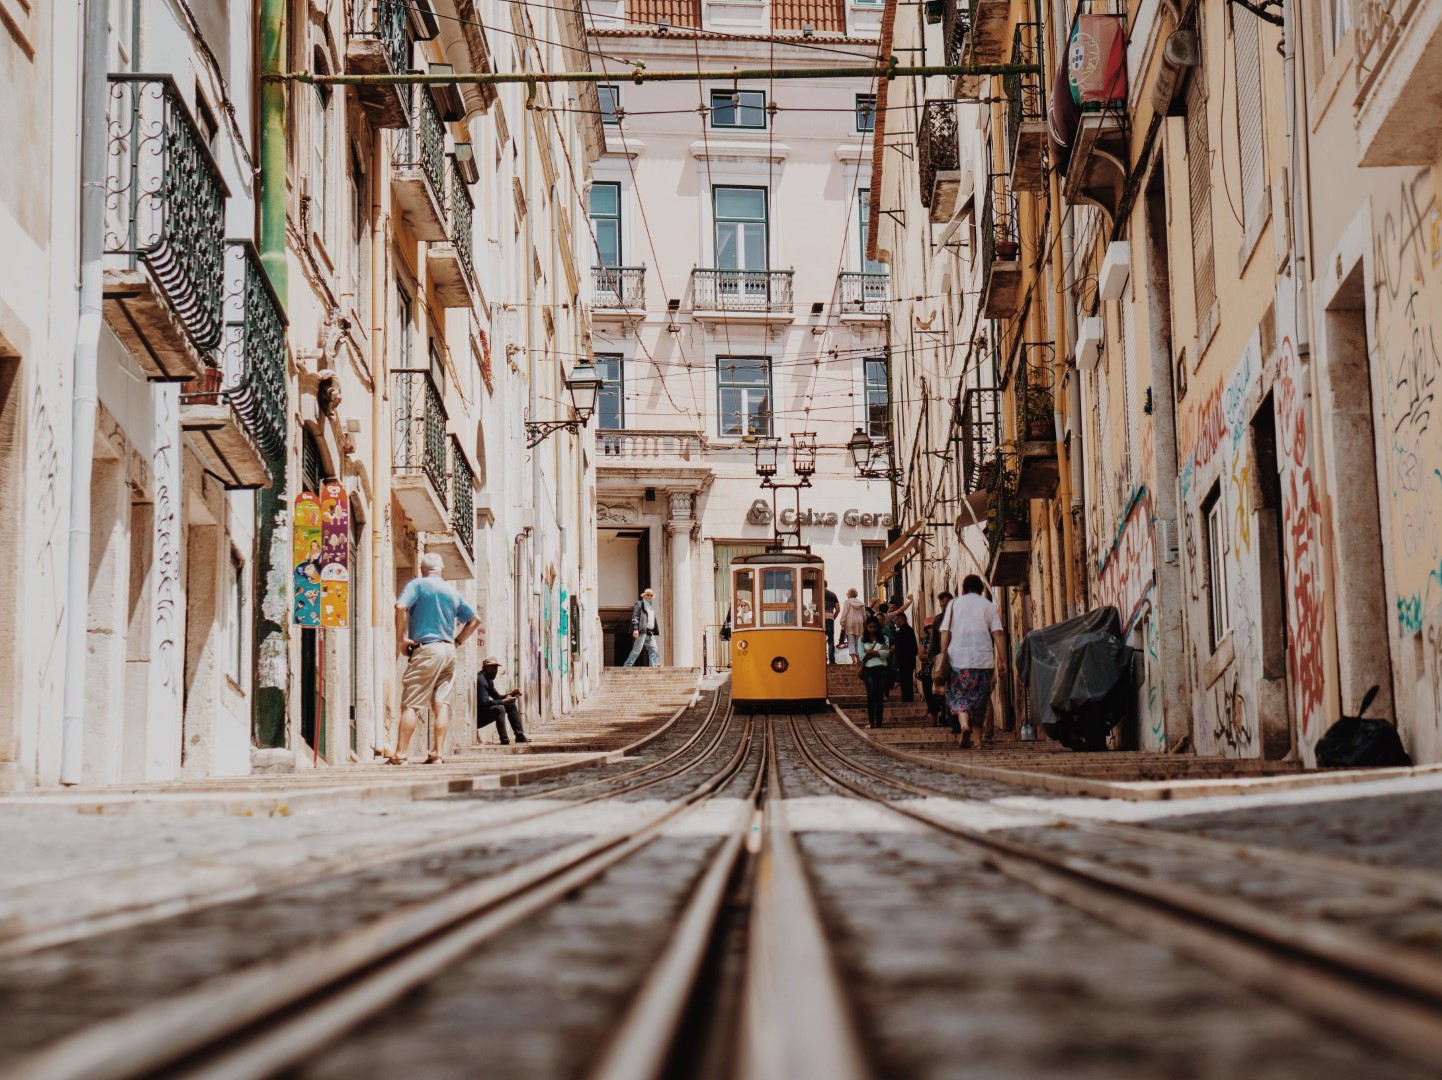 The article's cover image: 7 Reasons to Visit Portugal in 2023. In the image, people are passing by the Bica lift in Lisbon.